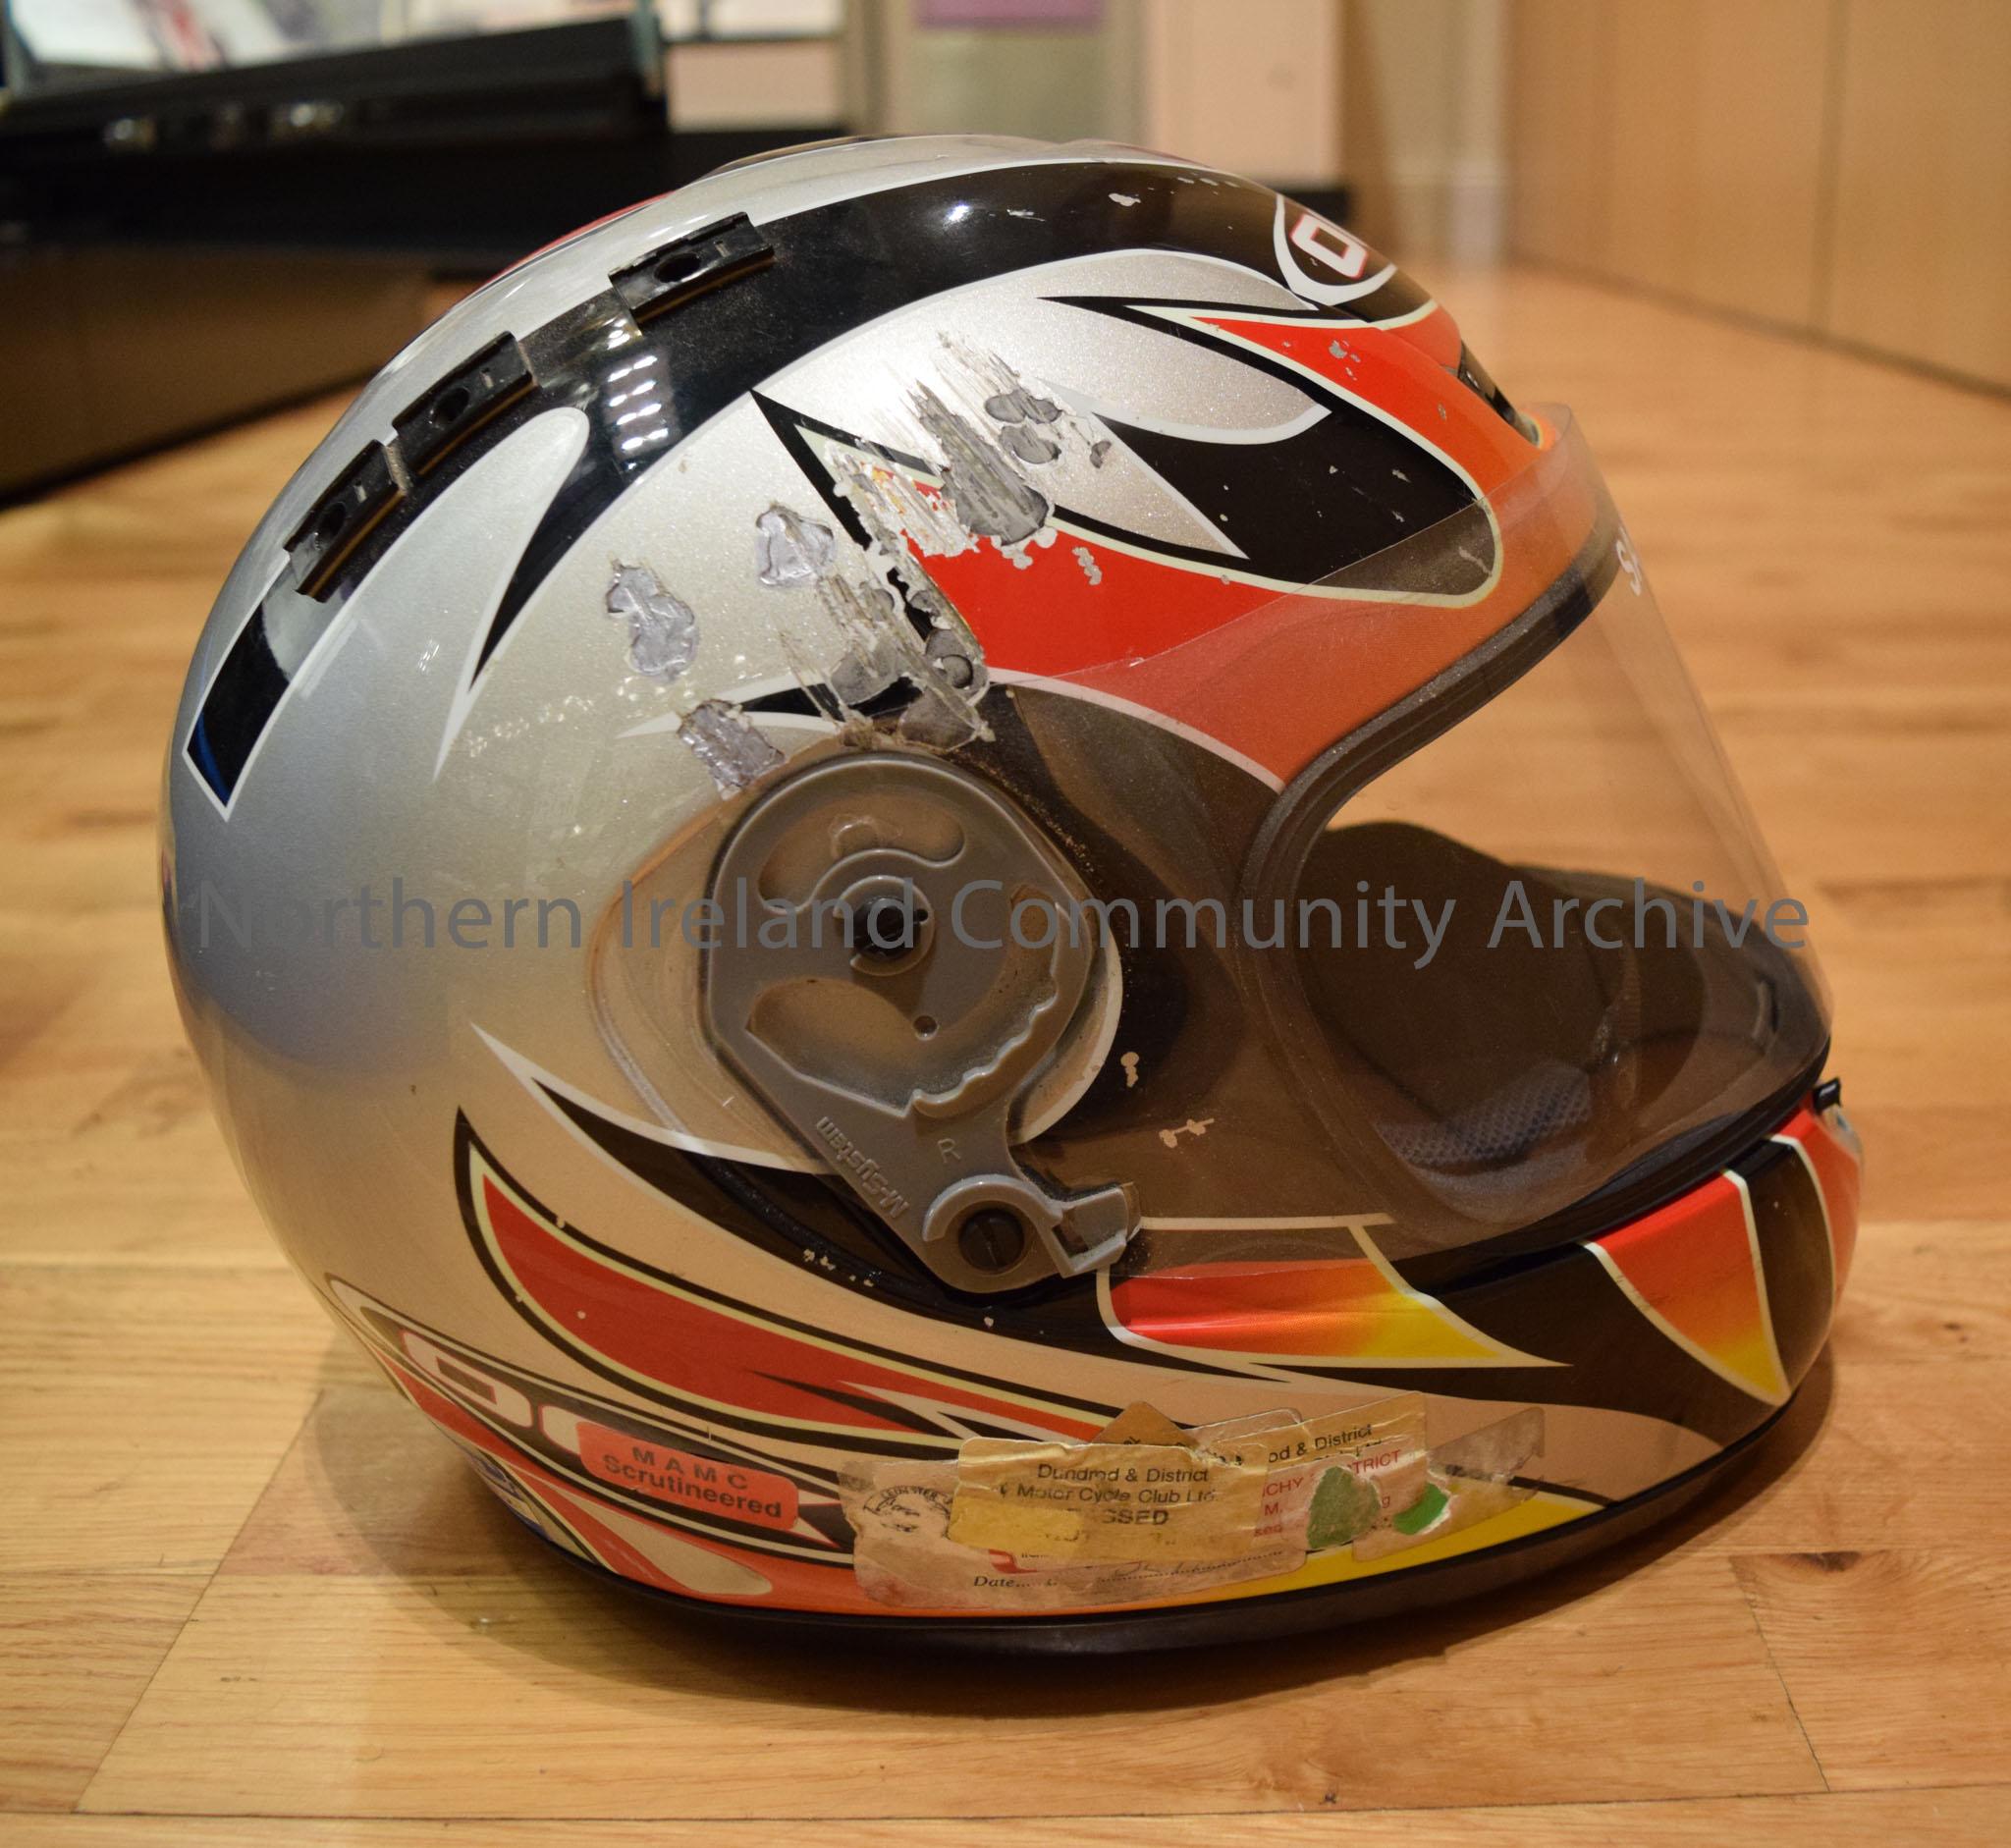 OGK motorcycle helmet belonging to Sam Dunlop. Grey helmet with black stripes and red and orange flame effects on the side and a red and orange curved… – 2016.114 (5)